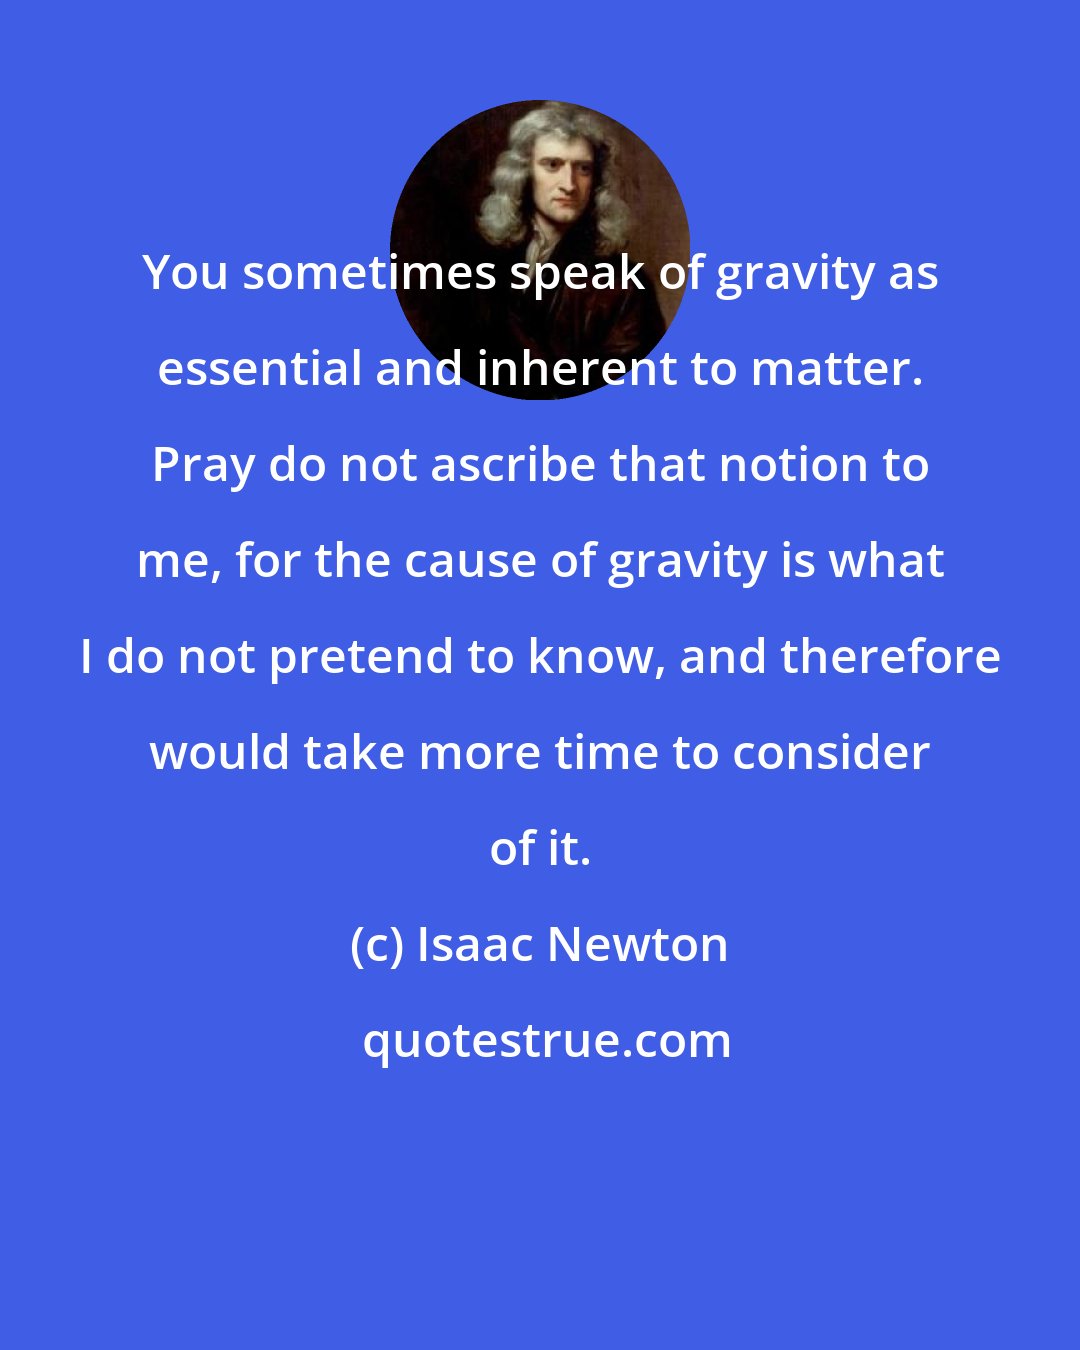 Isaac Newton: You sometimes speak of gravity as essential and inherent to matter. Pray do not ascribe that notion to me, for the cause of gravity is what I do not pretend to know, and therefore would take more time to consider of it.